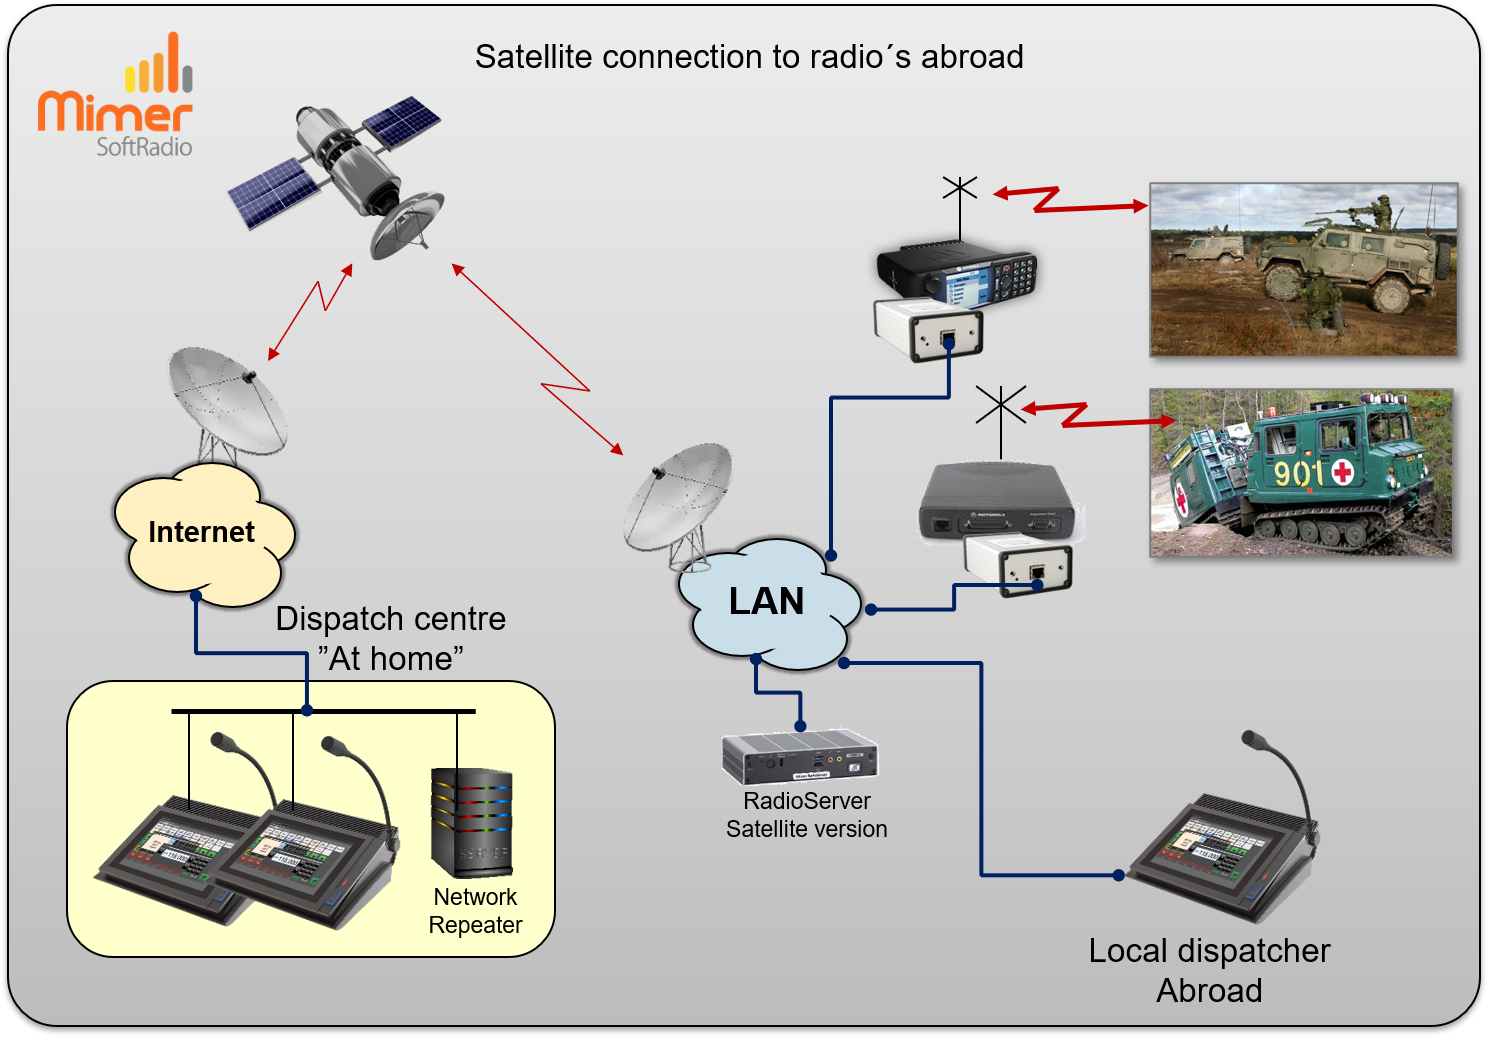 Remote control of radios at a mission abroad